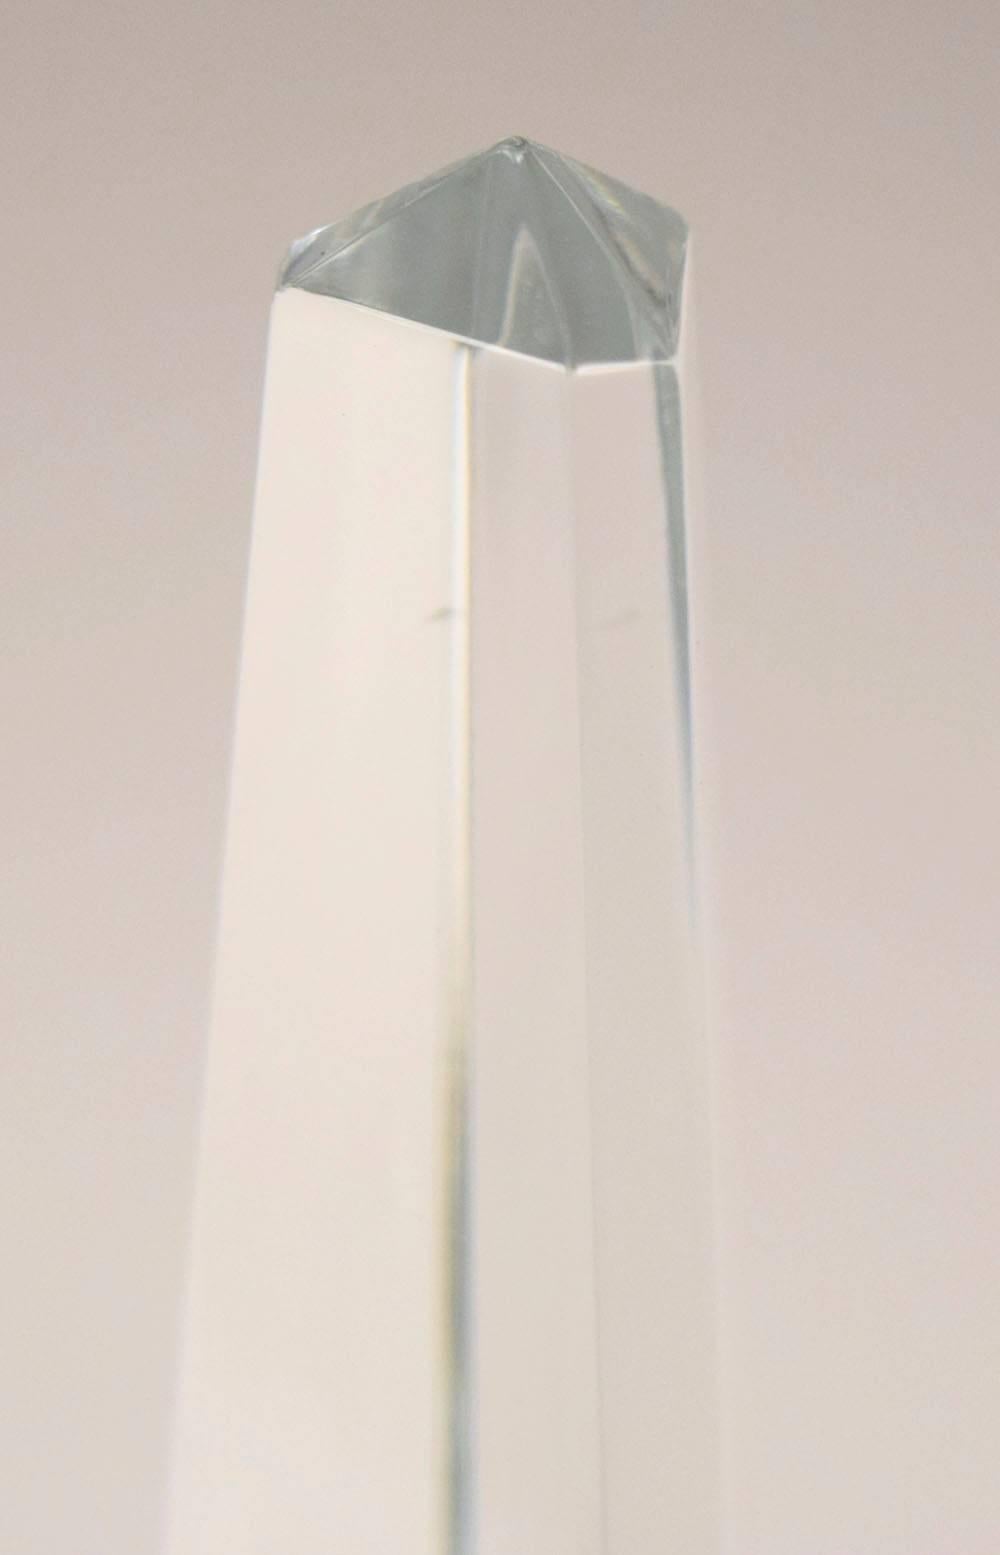 This stunning fine cut crystal obelisk is by Baccarat. It bears the Baccarat stamp and seal on the bottom. It is in incredible an in good condition.

Note: Has a small chip on one of the sides.